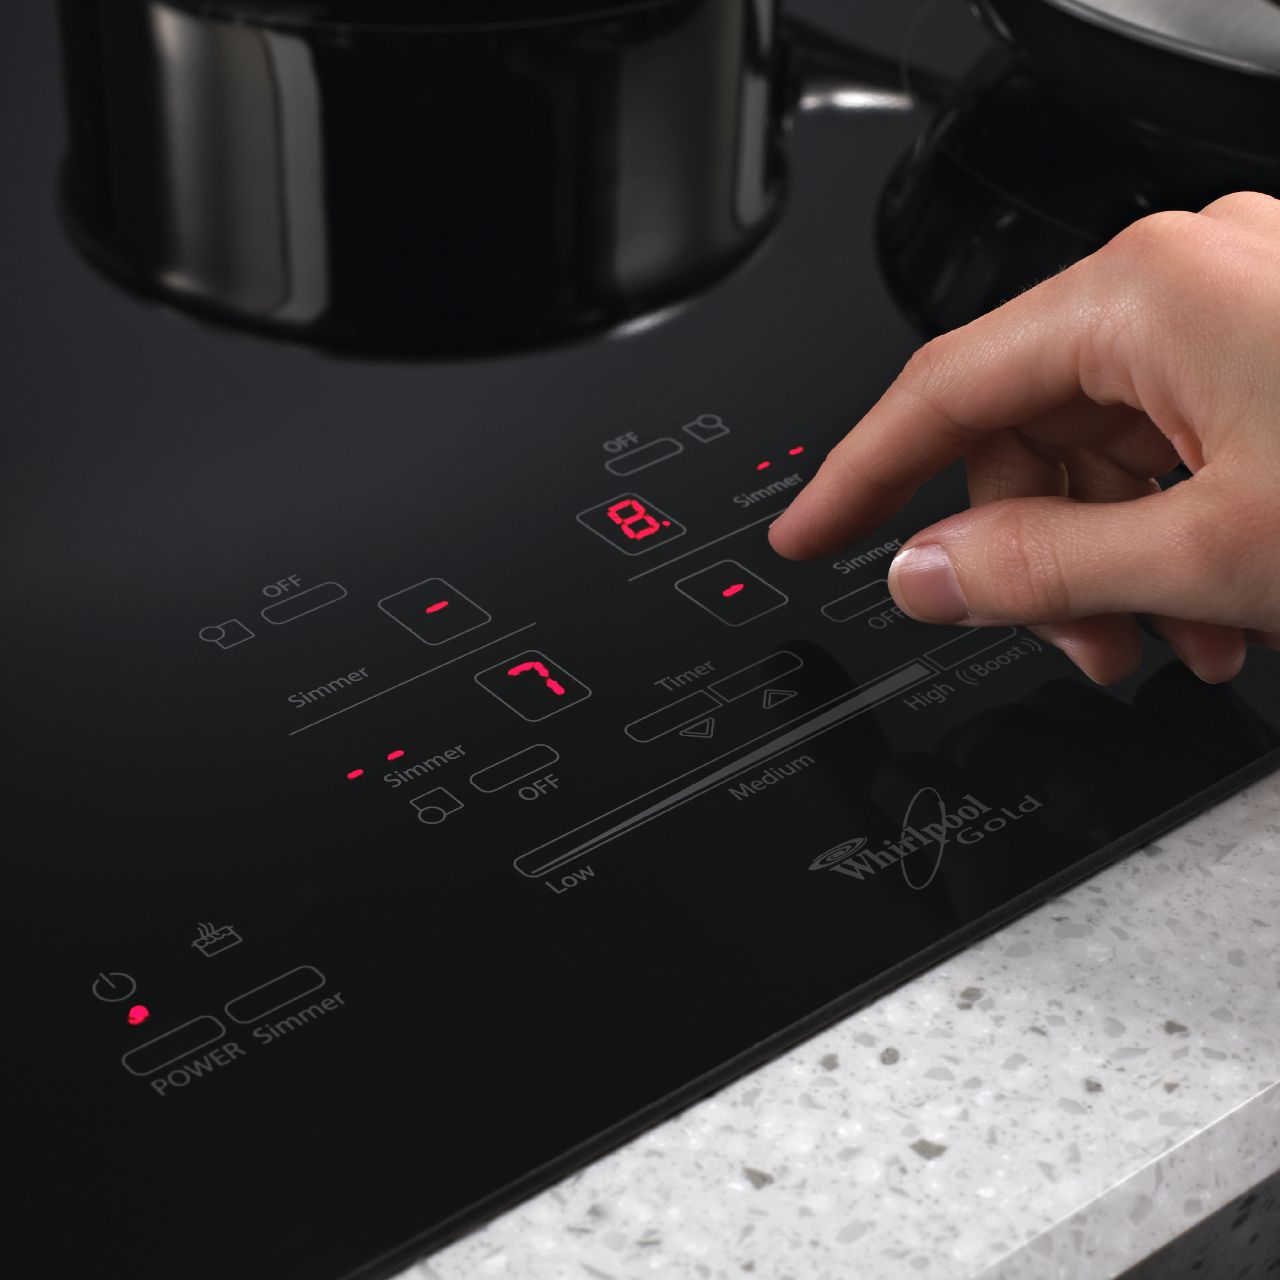 Kinematik millimeter skrivebord Troubleshooting Why Your Induction Cooktop Isn't Heating Your Pans -  Authorized Service